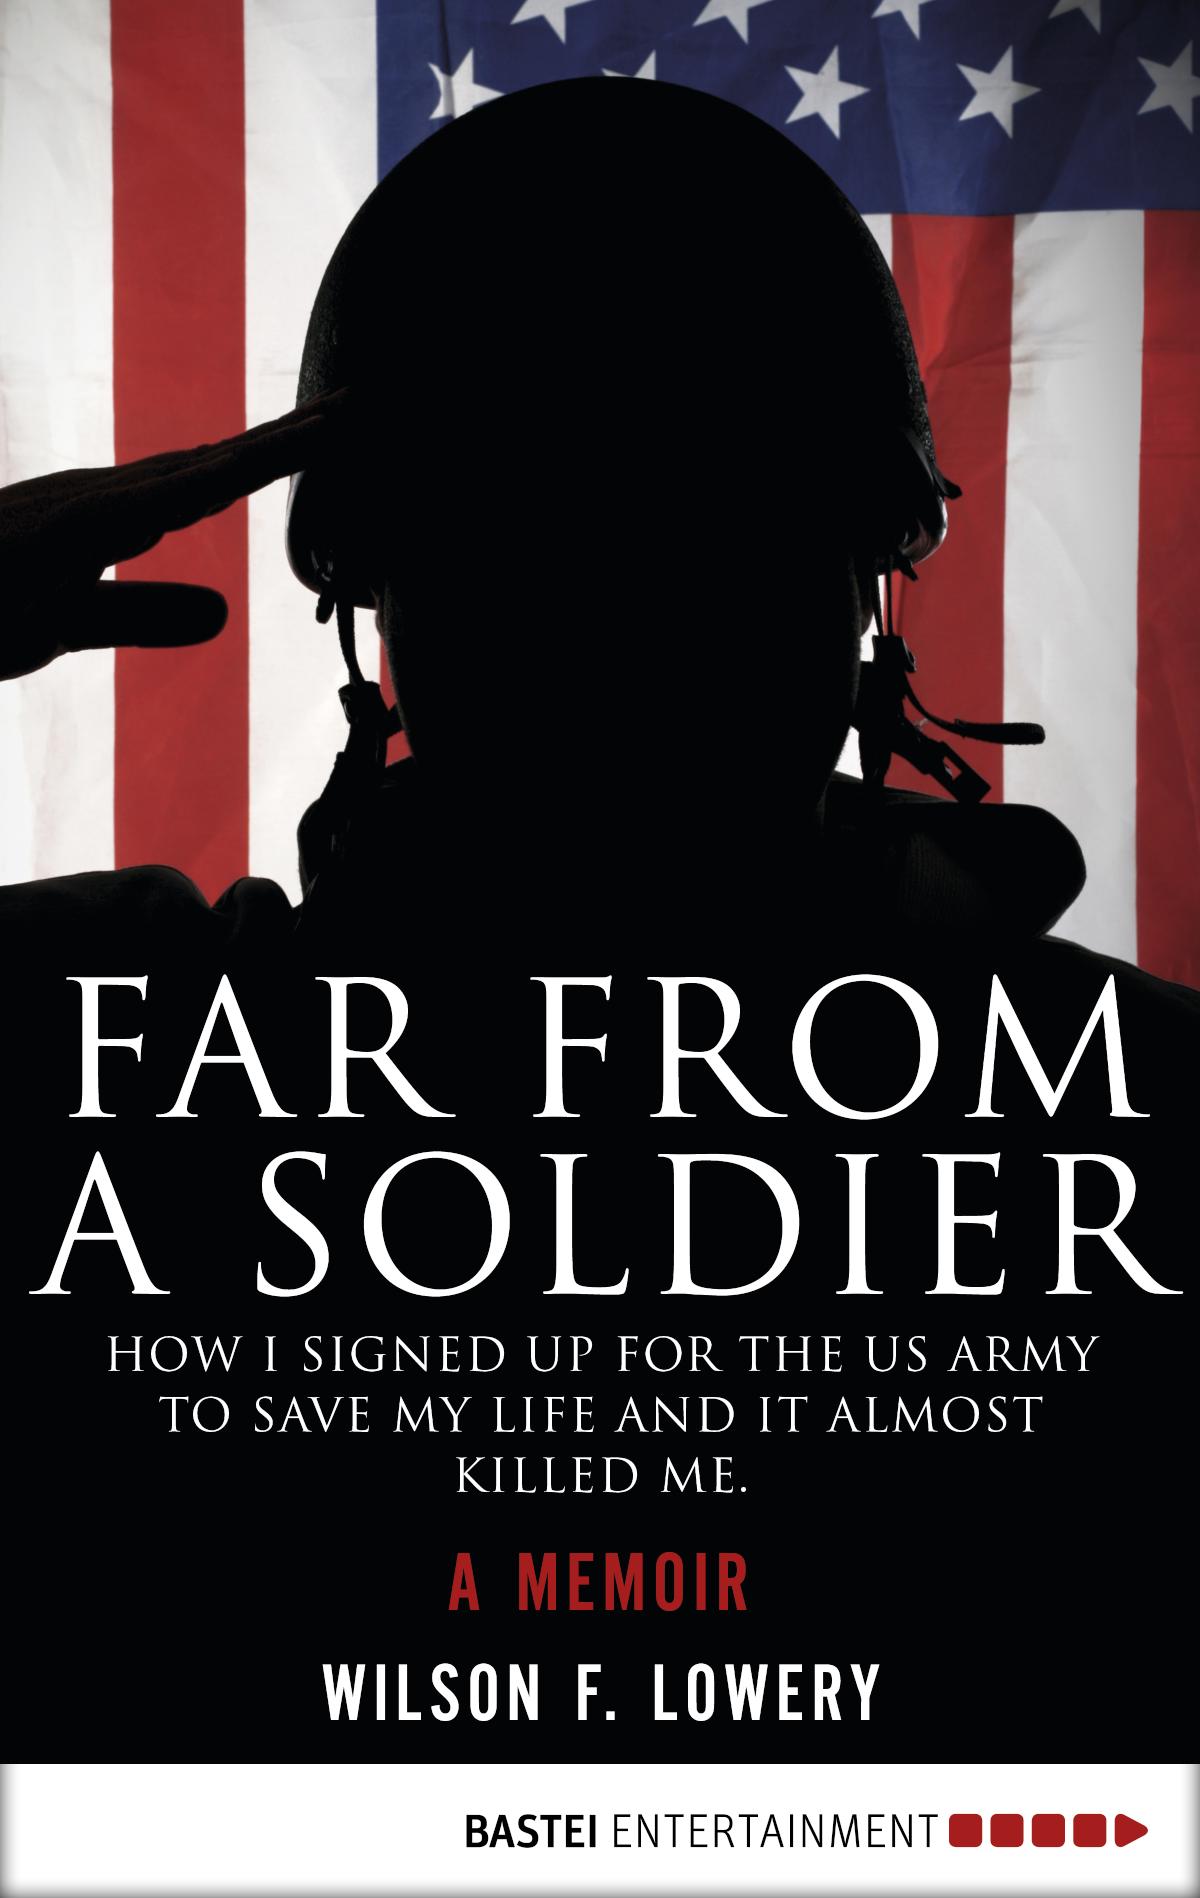 Far From a Soldier How I Signed Up for the US Army to Save My Life and It Almost Killed Me. A Memoir